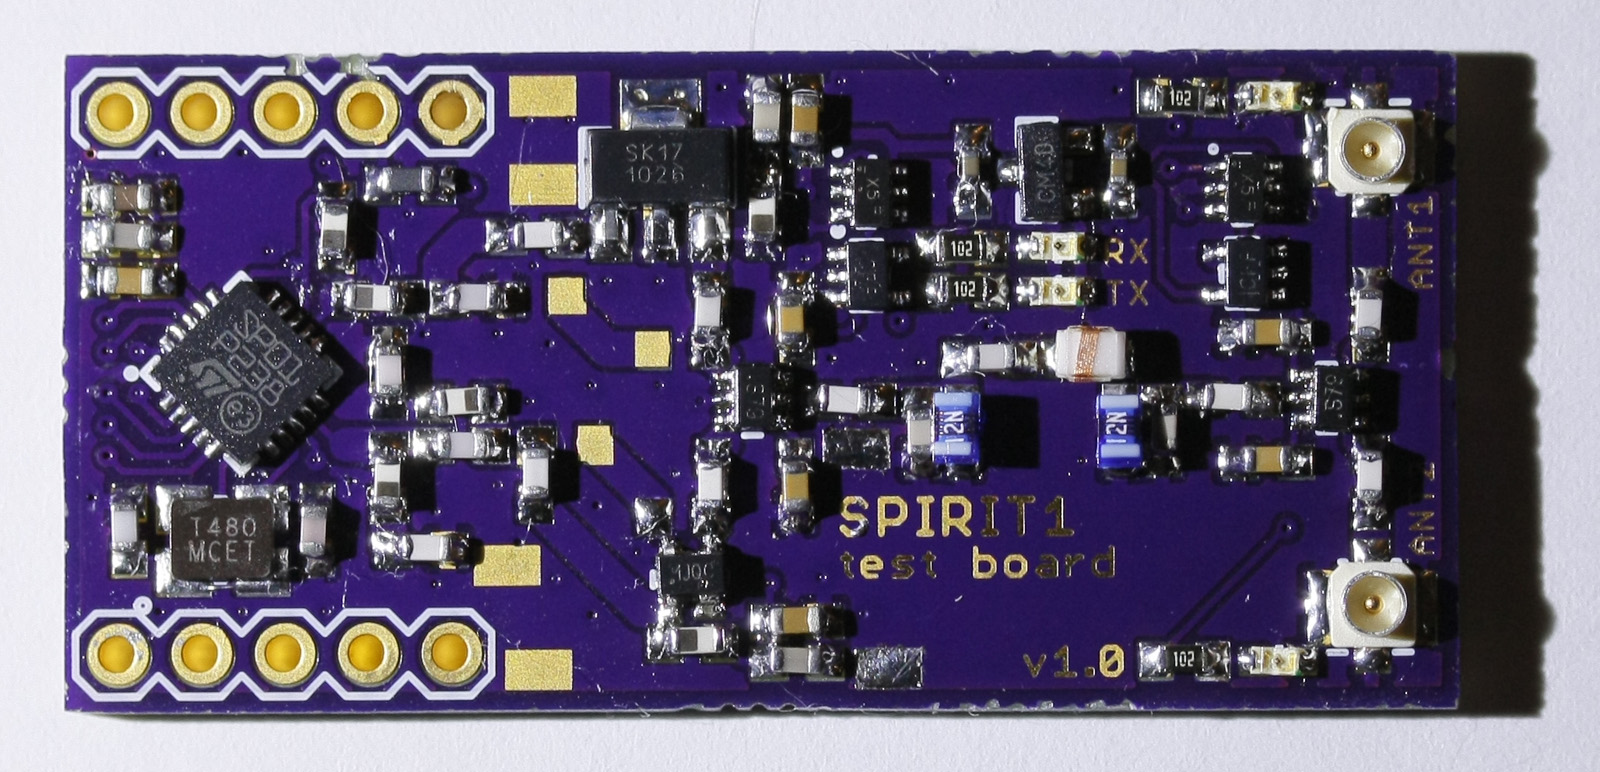 Top view of the SPIRIT1 test board